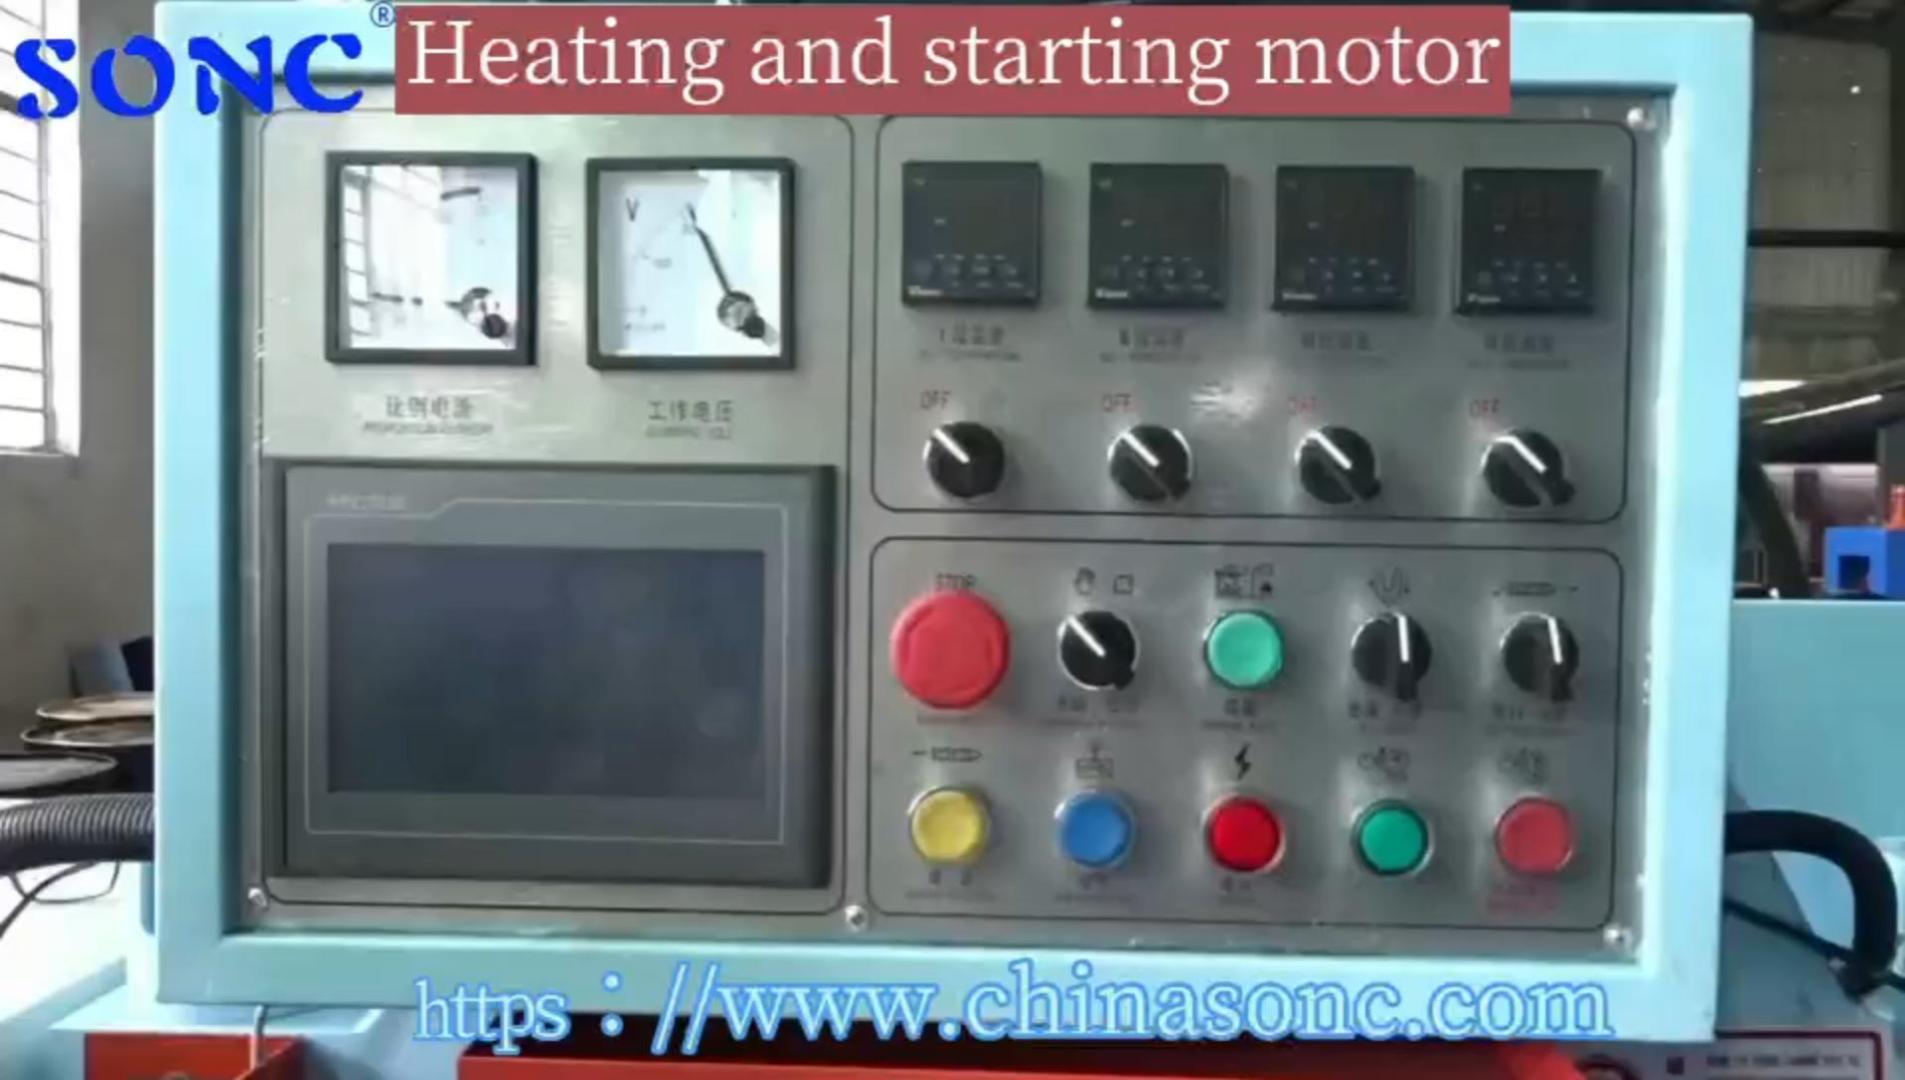 Equipment heating and automatic start